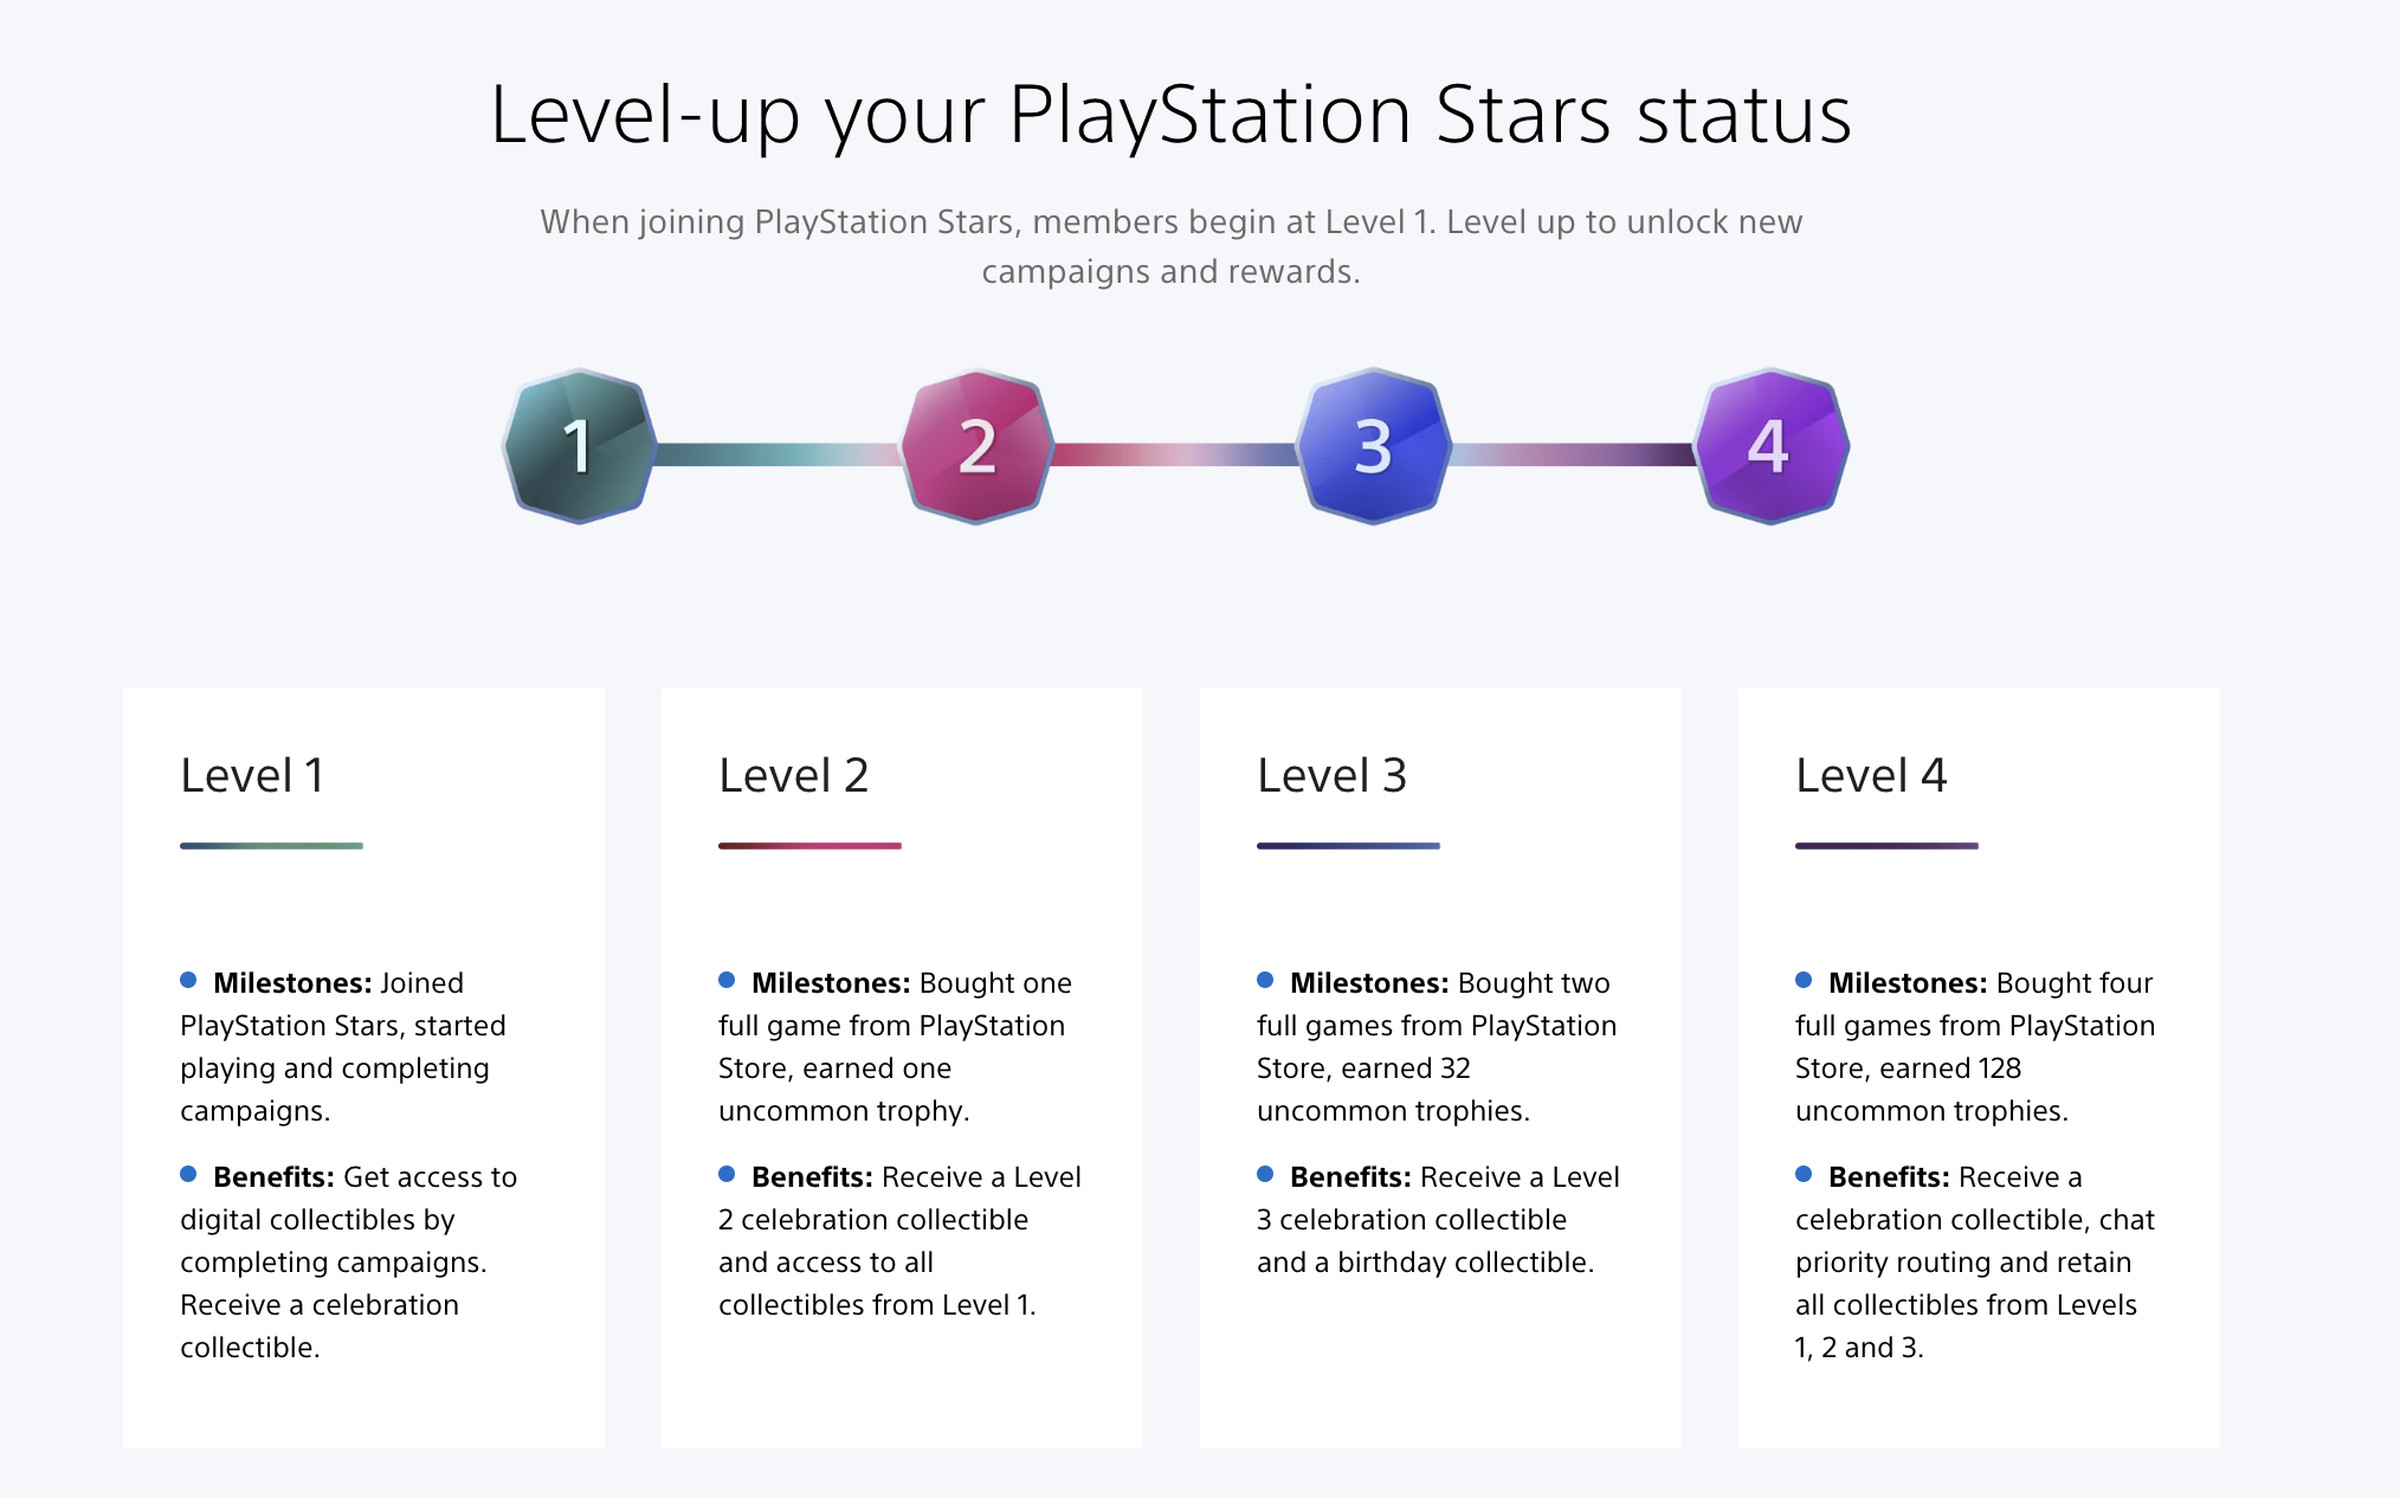 A screenshot from the PlayStation Stars website describing the four different PlayStation Stars levels.